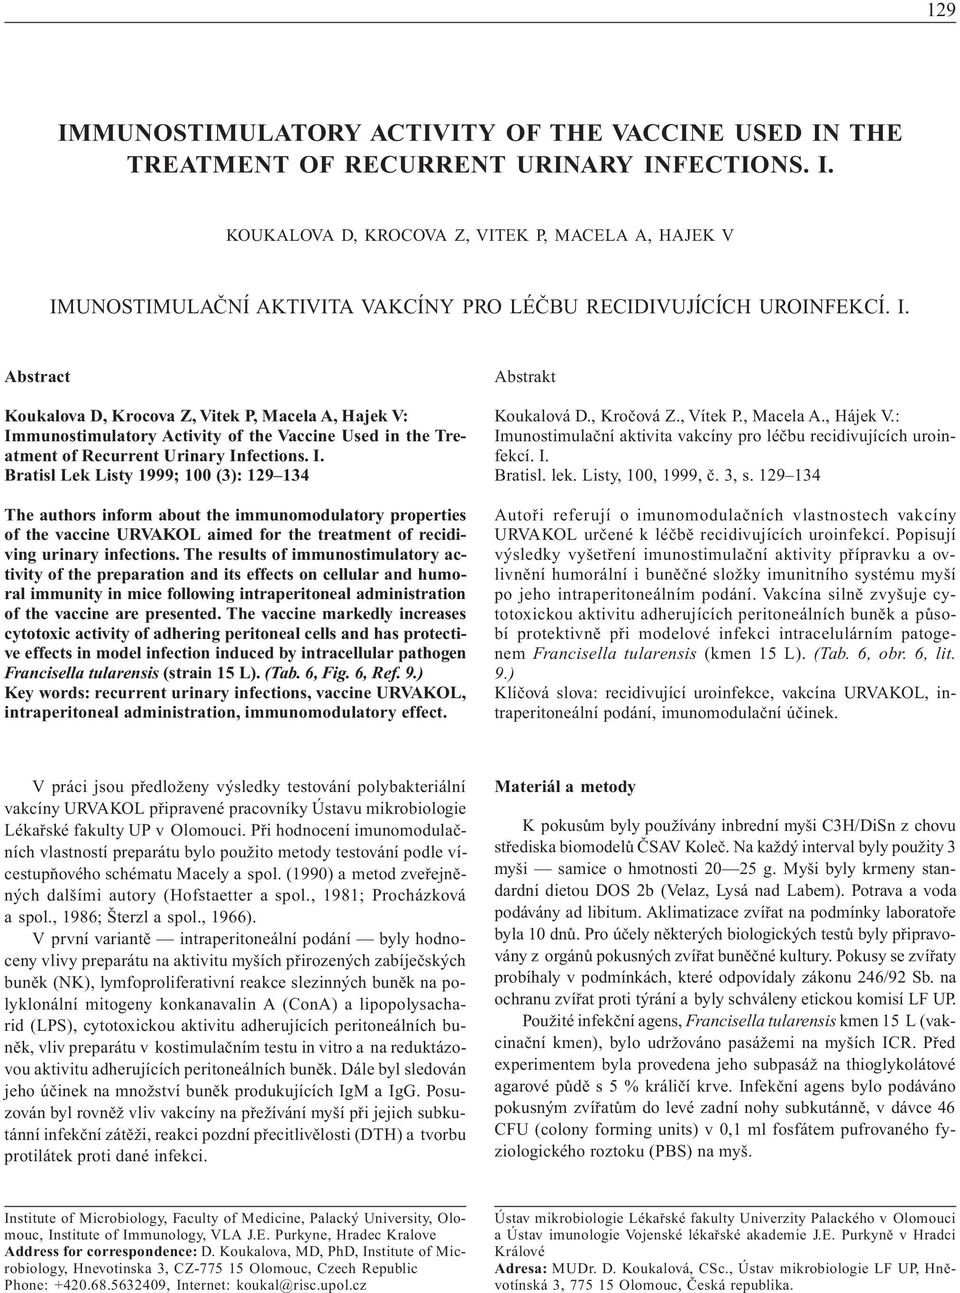 munostimulatory Activity of the Vaccine Used in the Treatment of Recurrent Urinary In